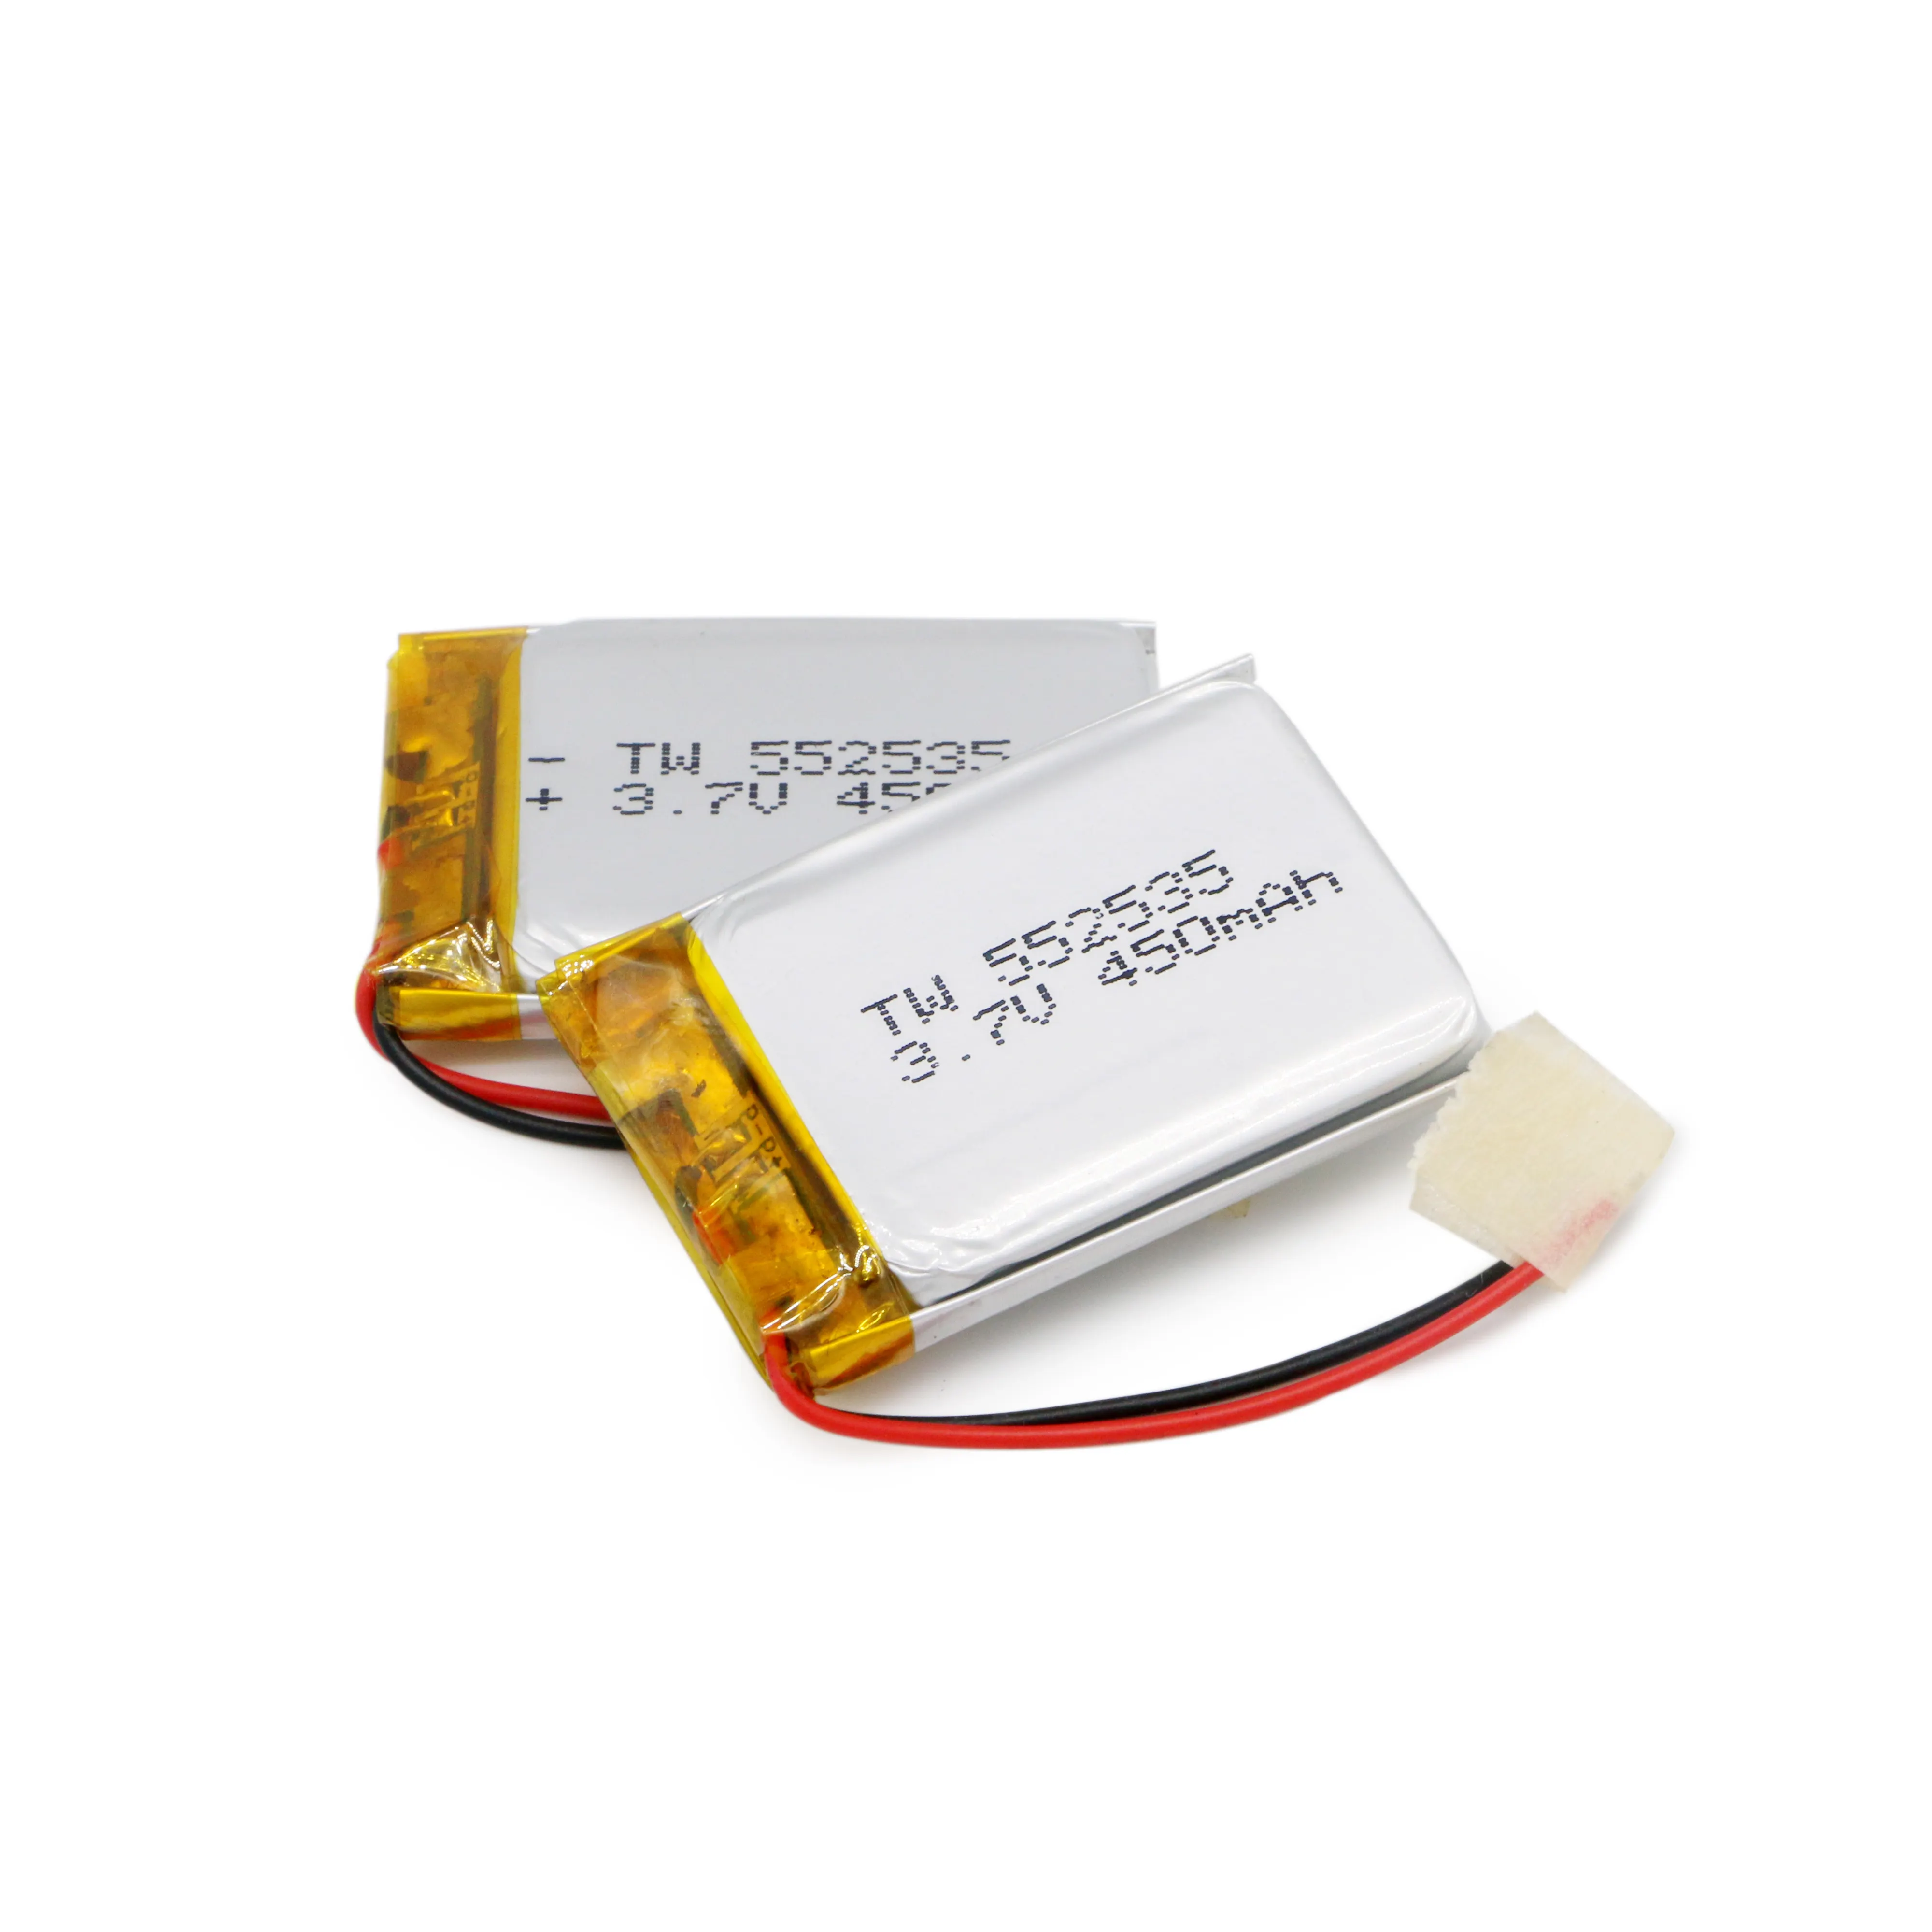 552535 450mah 3.7v lithium polymer ion battery cells pack ion for headset with kc gsp connector